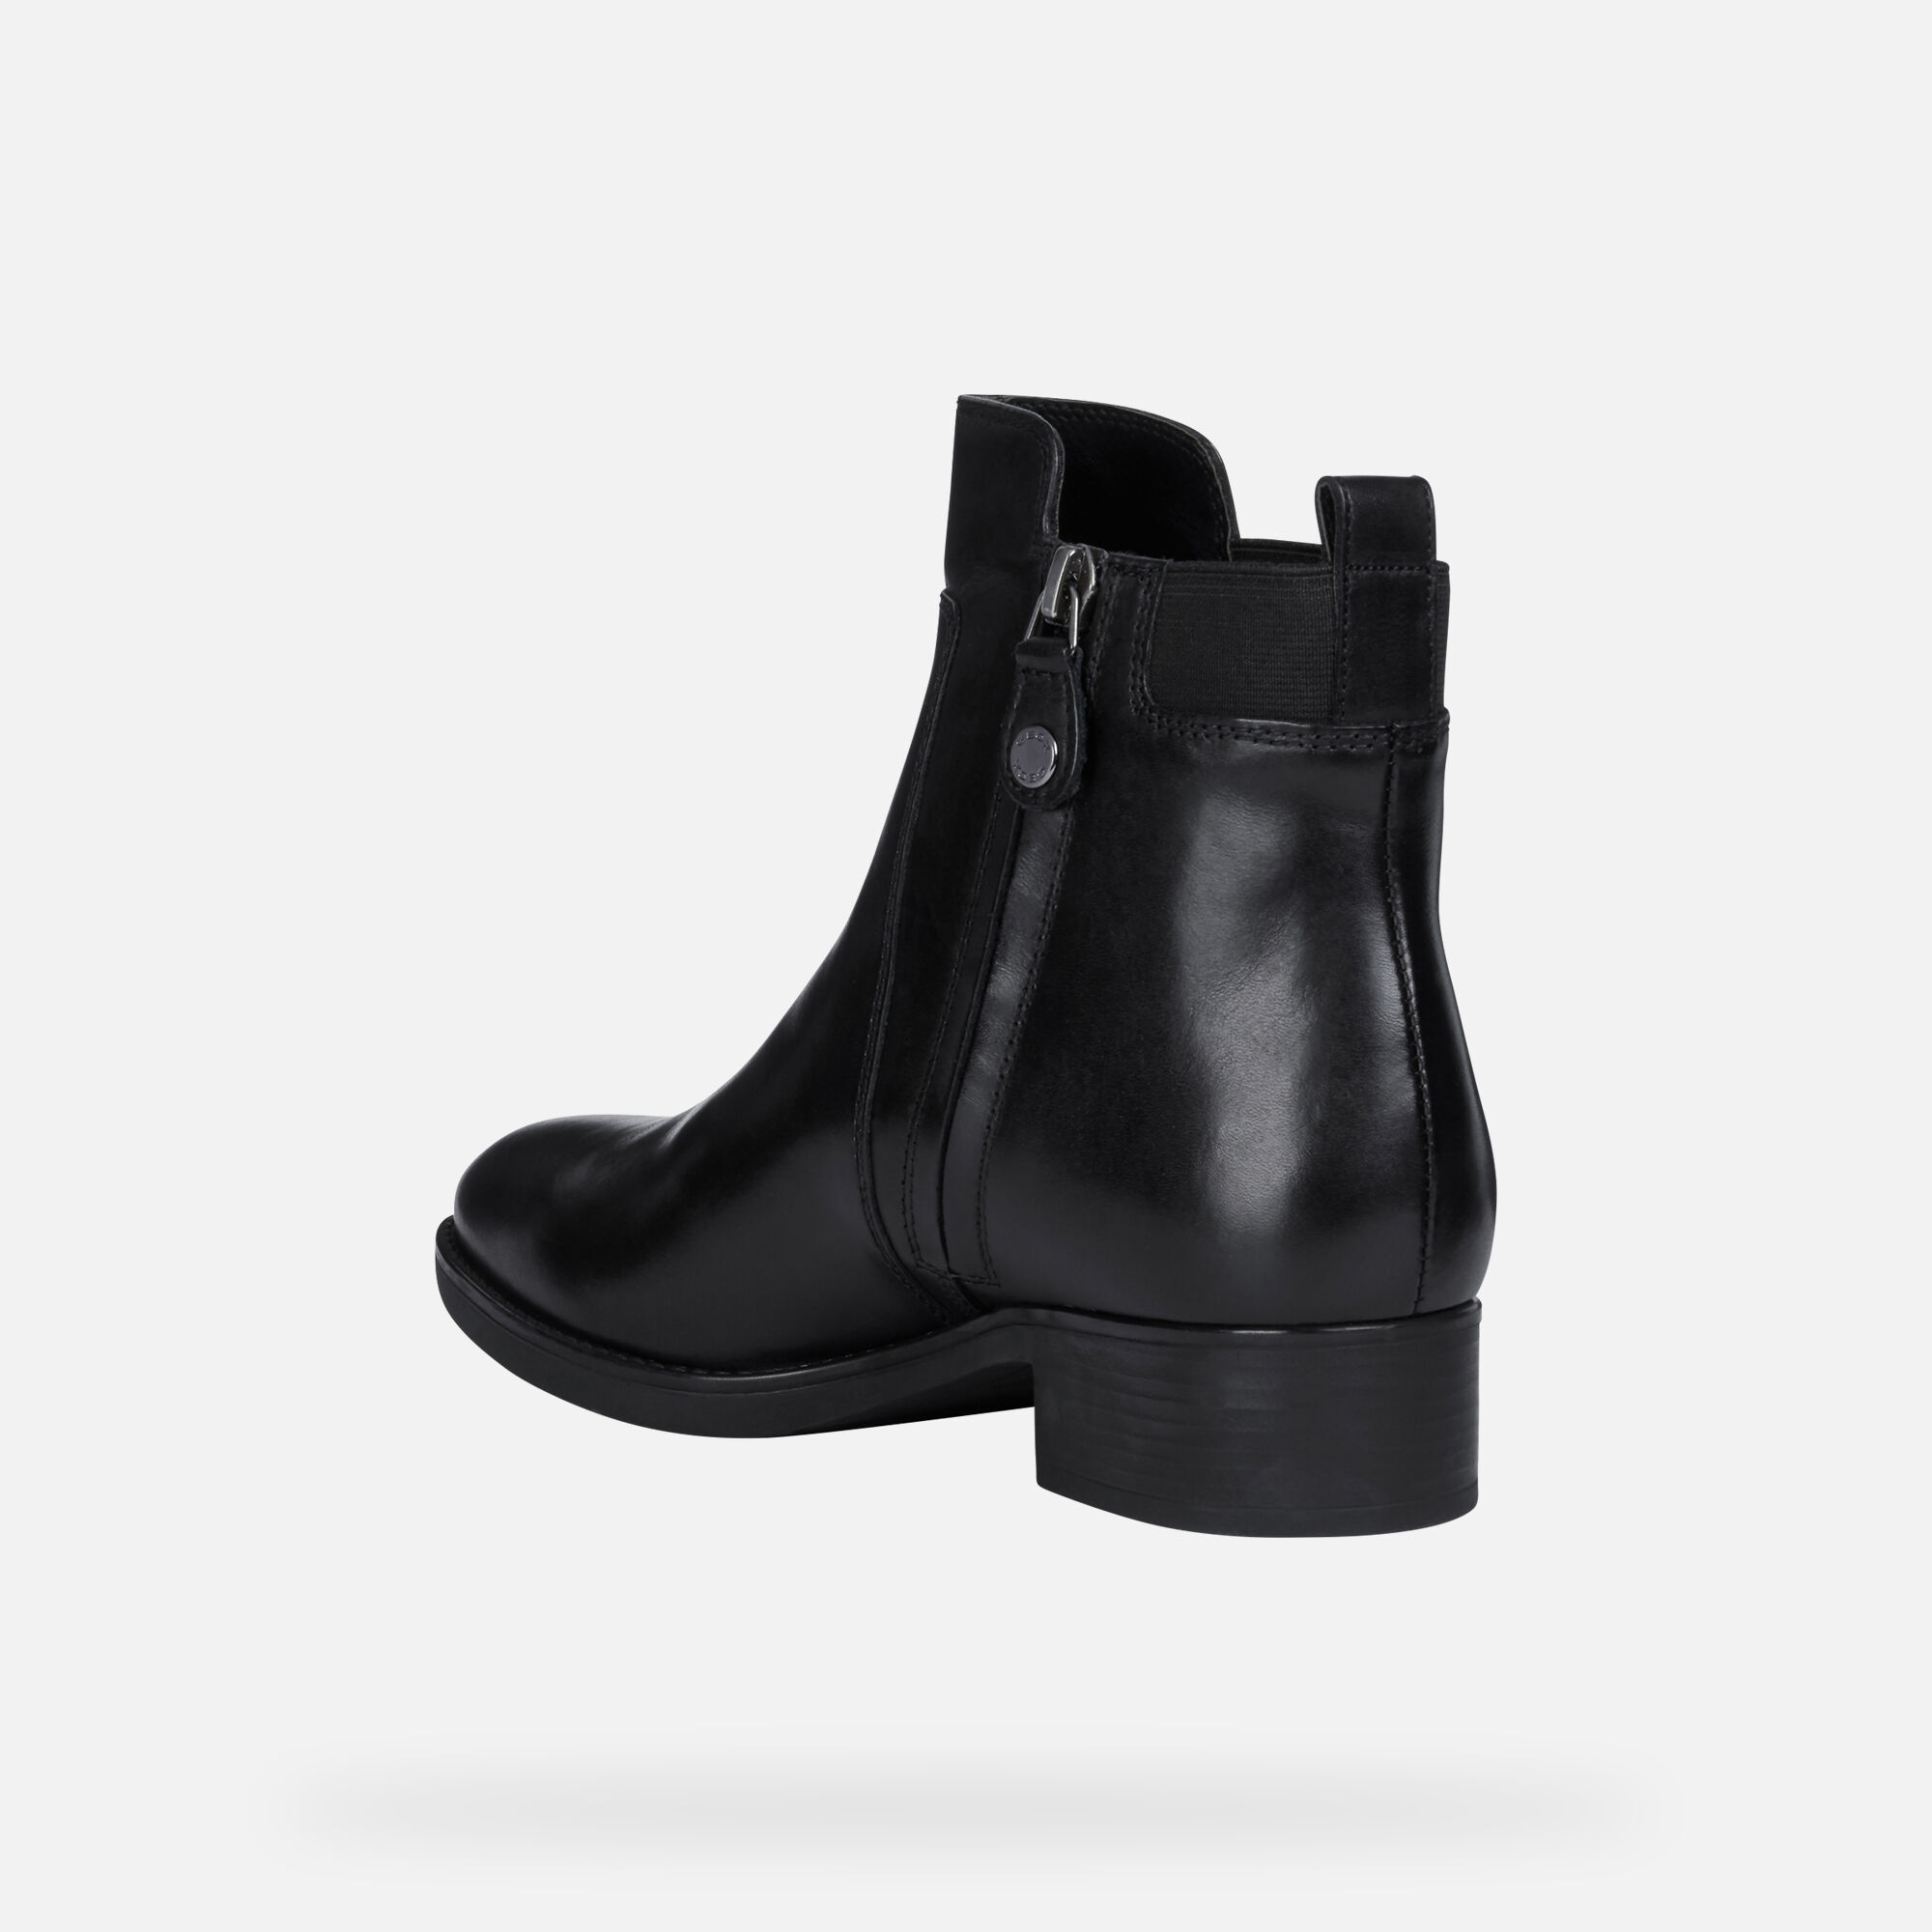 Geox FELICITY Woman: Black Ankle Boots 